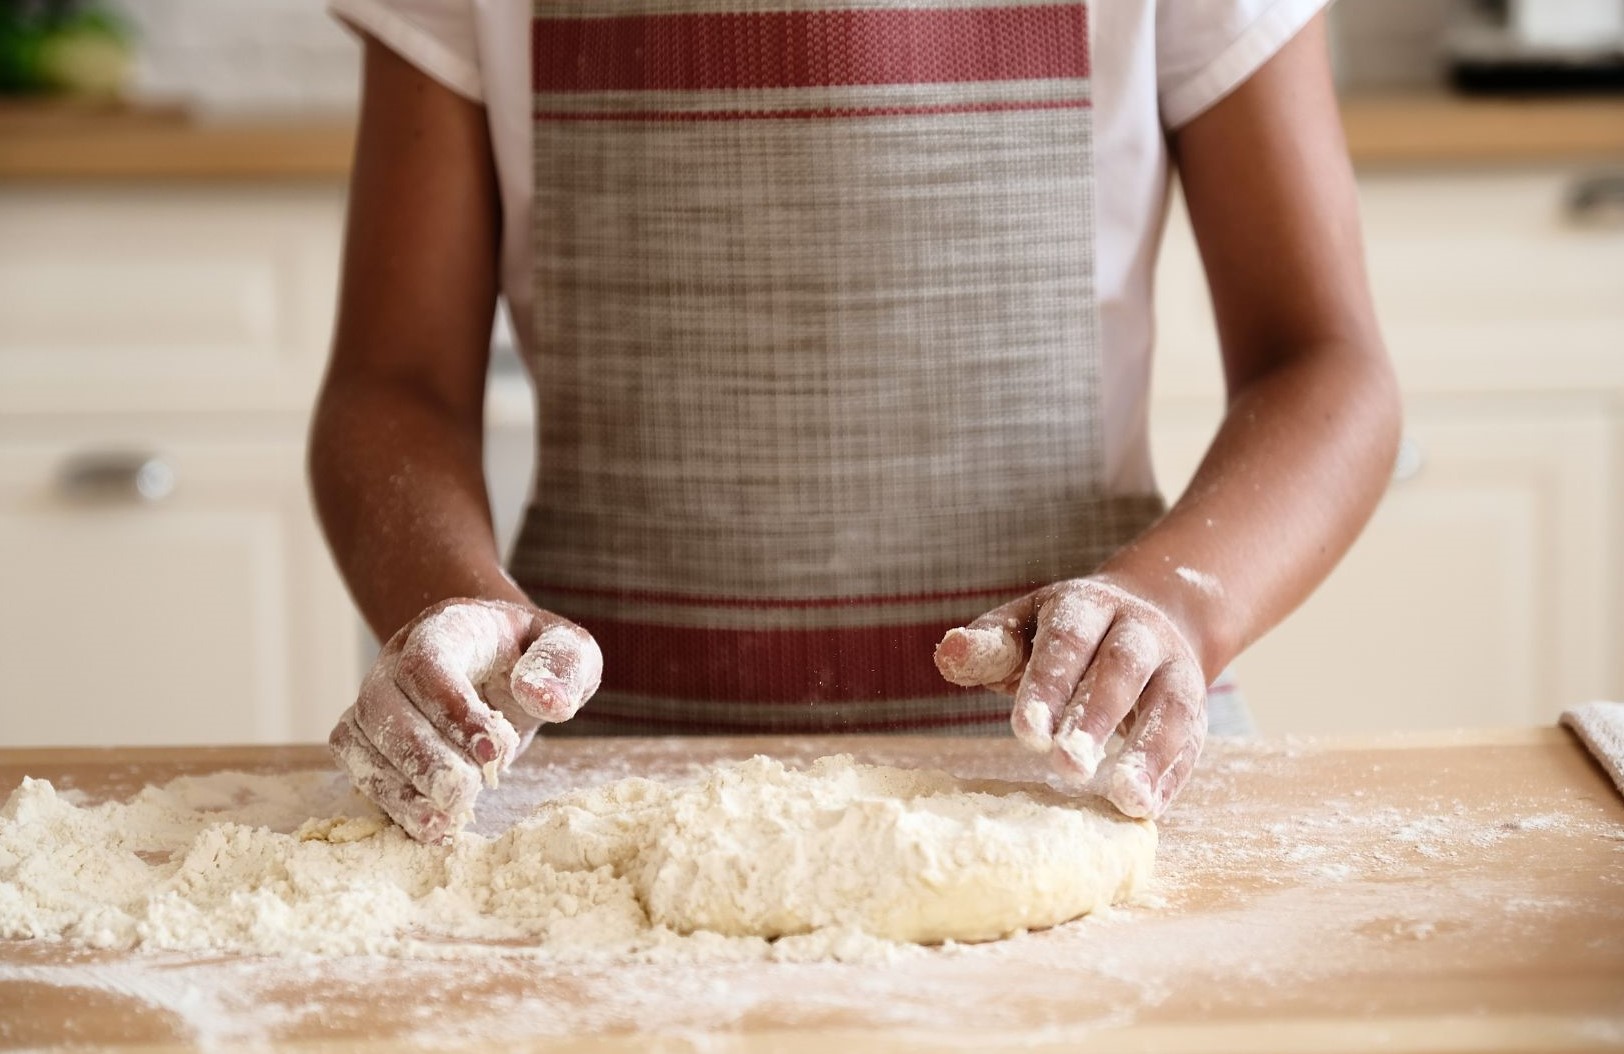 Child working with dough.